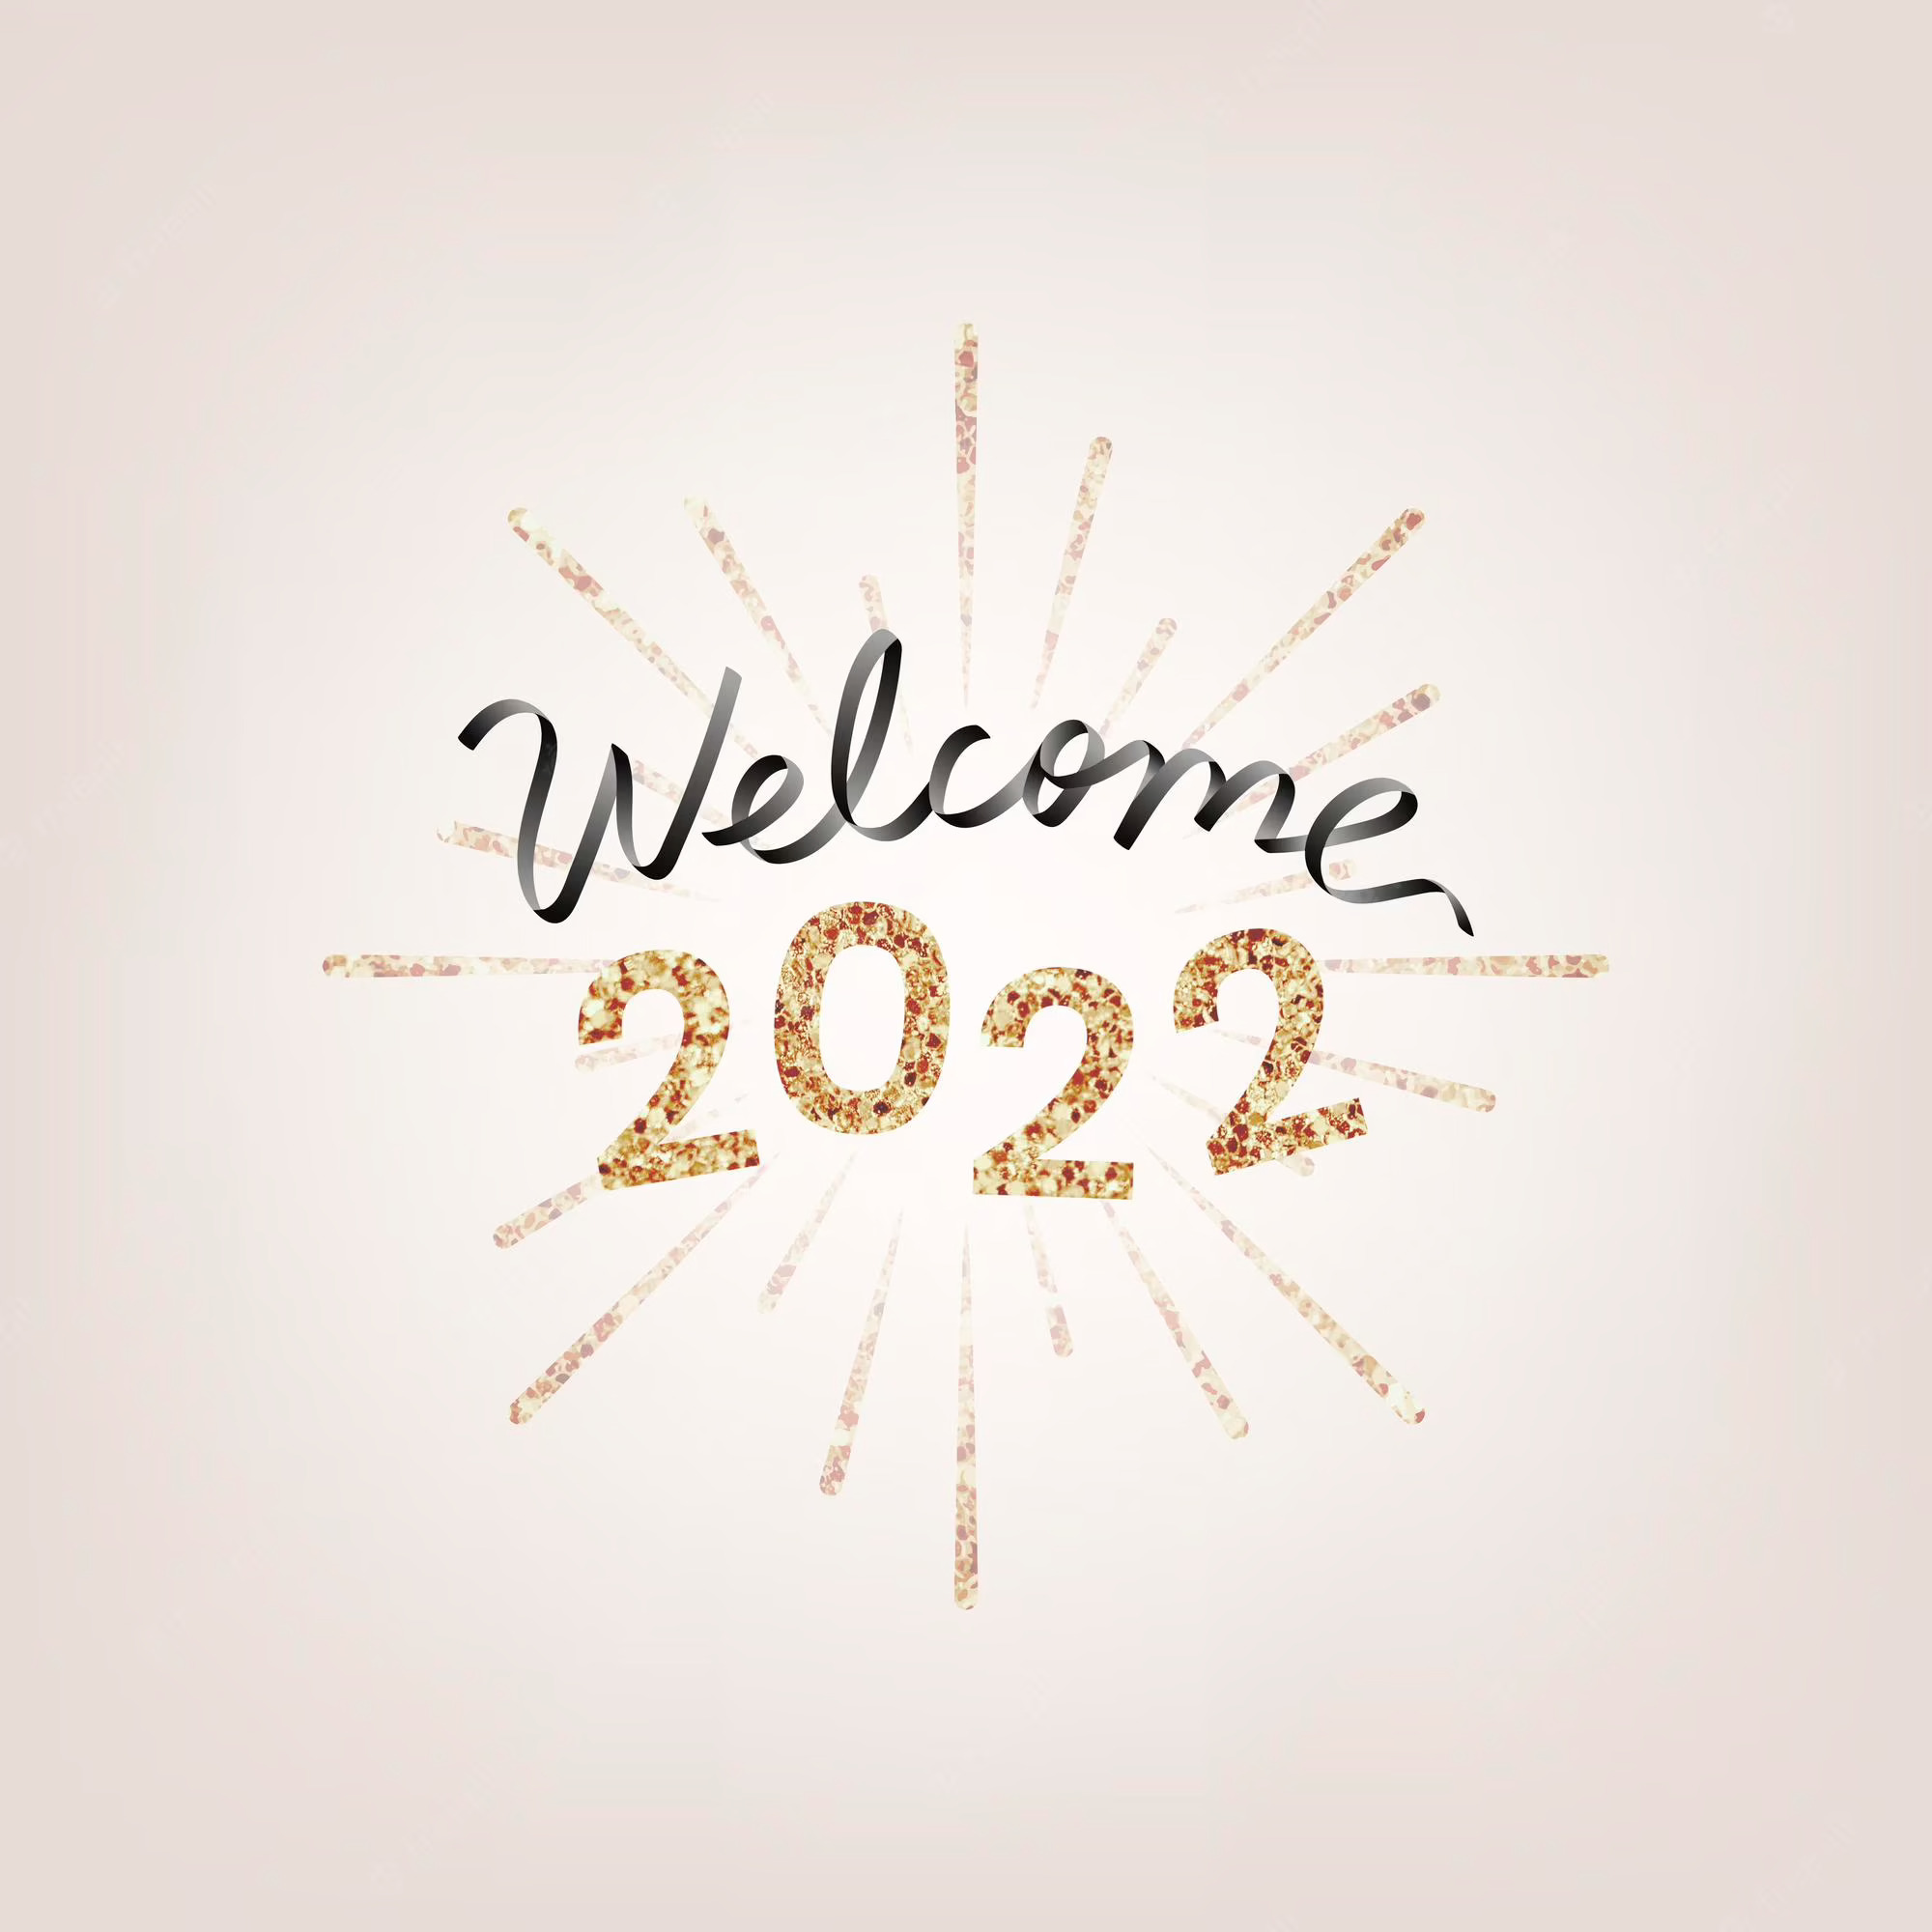 Welcome to 2022!